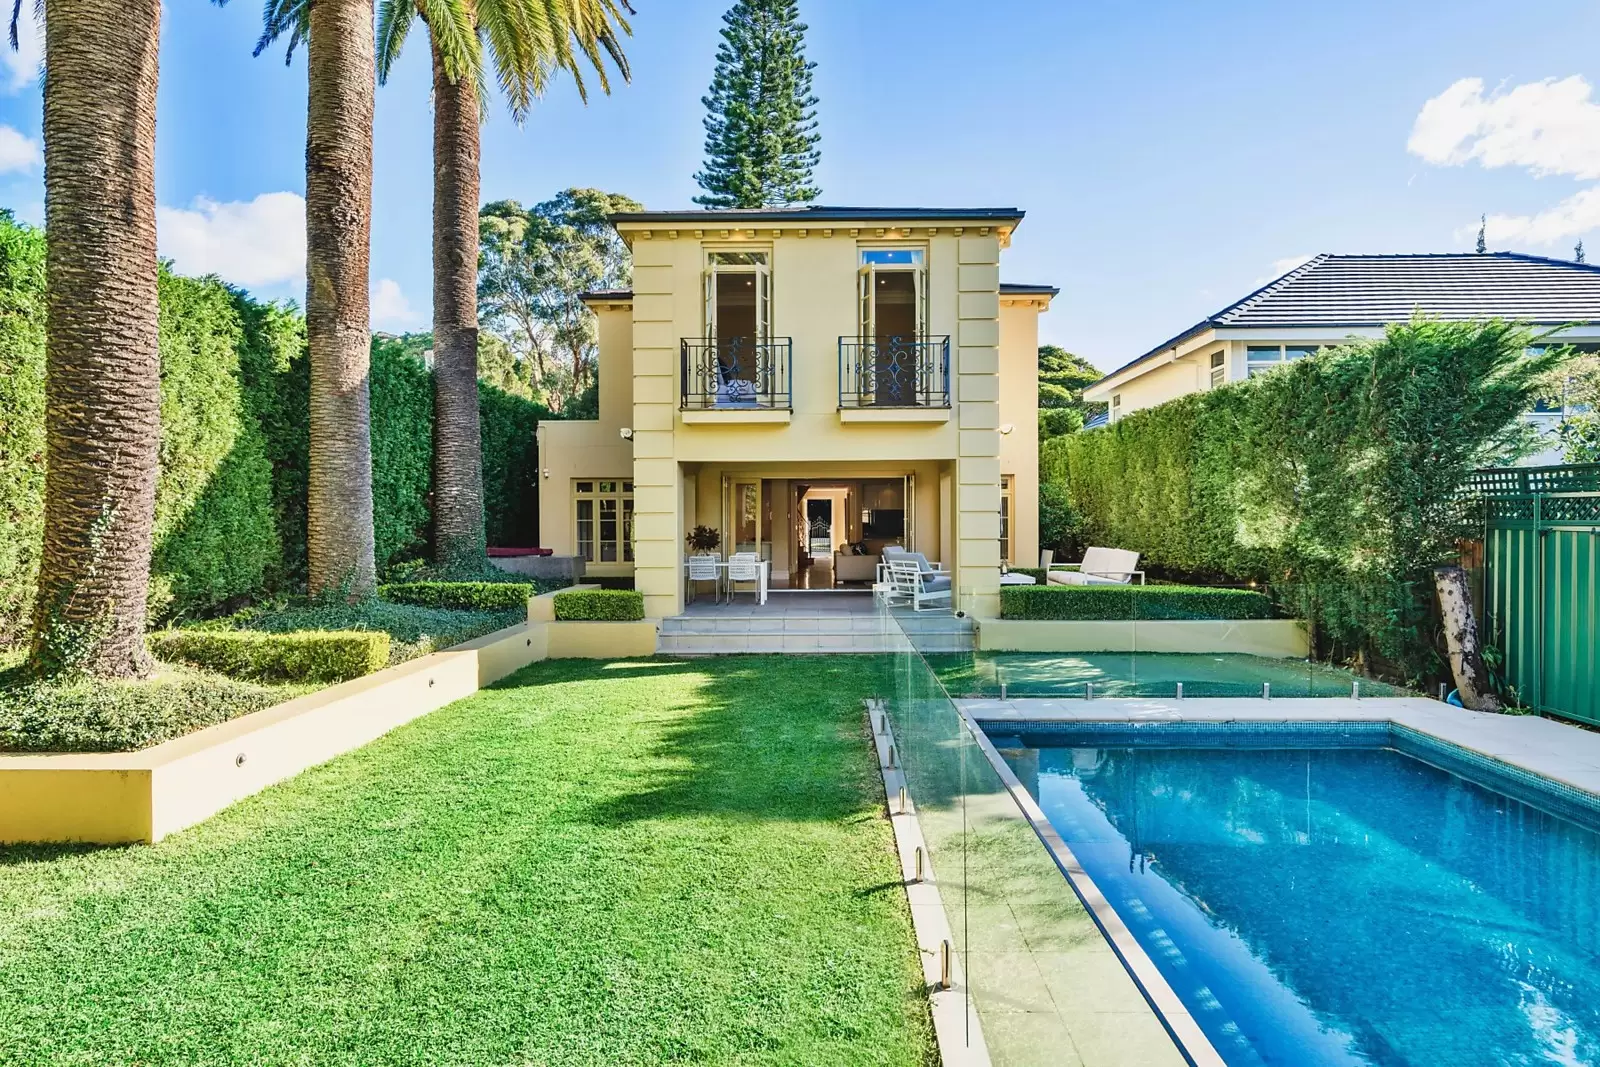 Photo #15: 81 Balfour Road, Bellevue Hill - Sold by Sydney Sotheby's International Realty